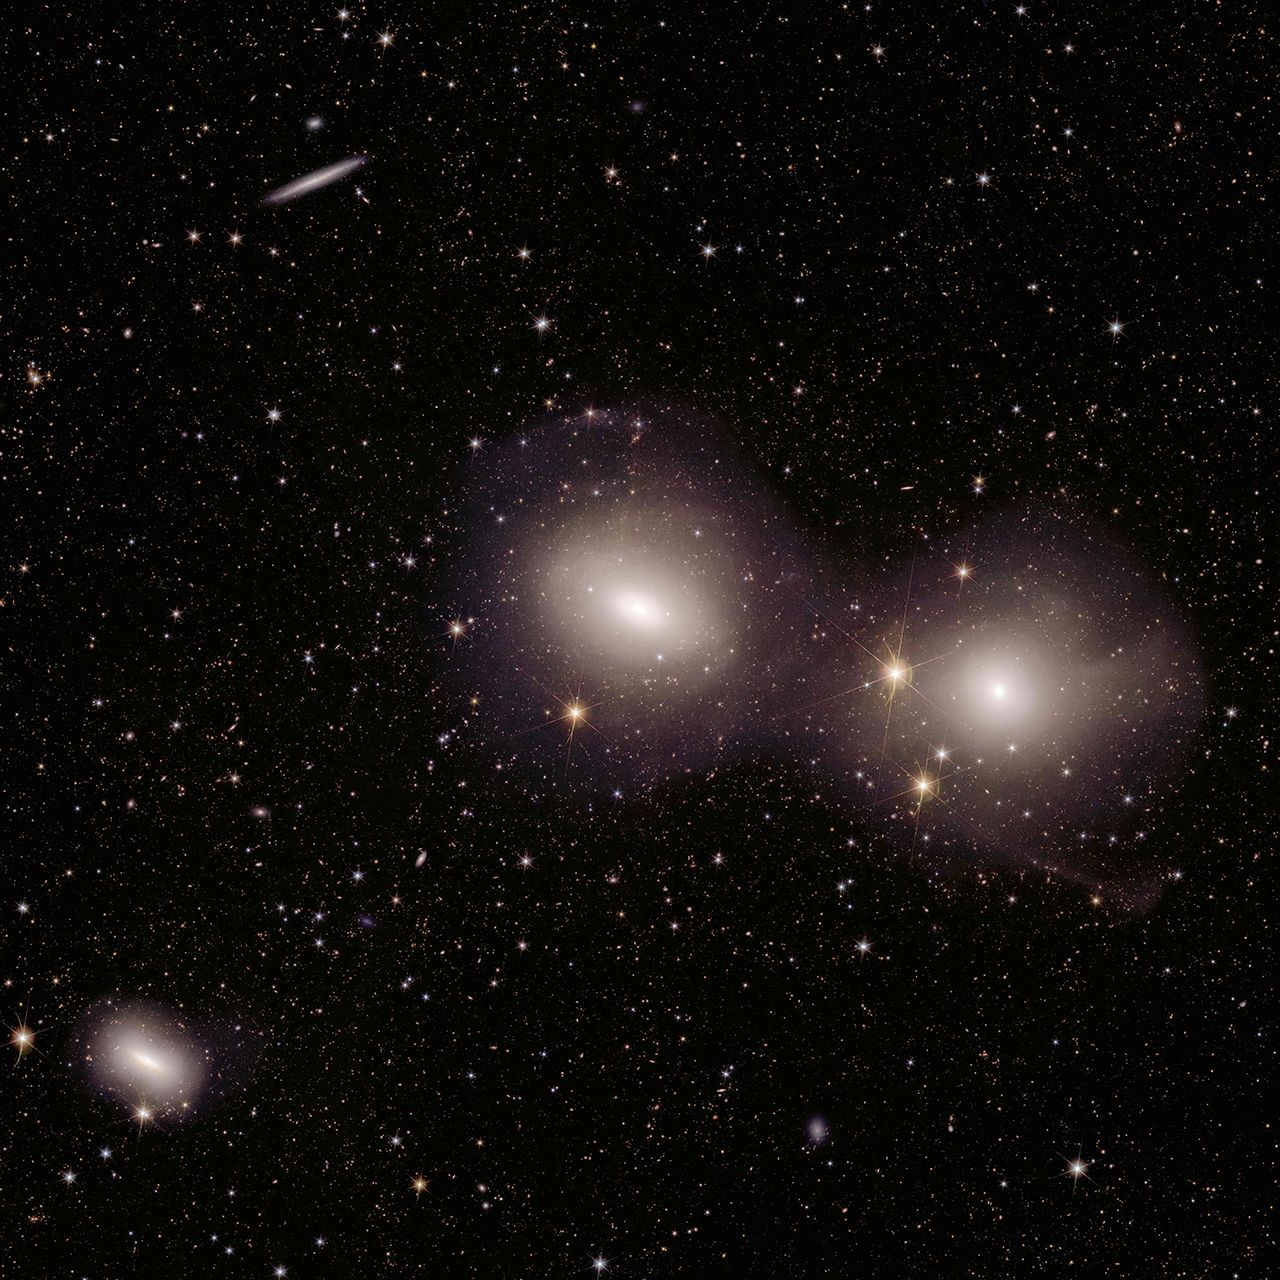 A group of galaxies in the Serpenthead constellation.